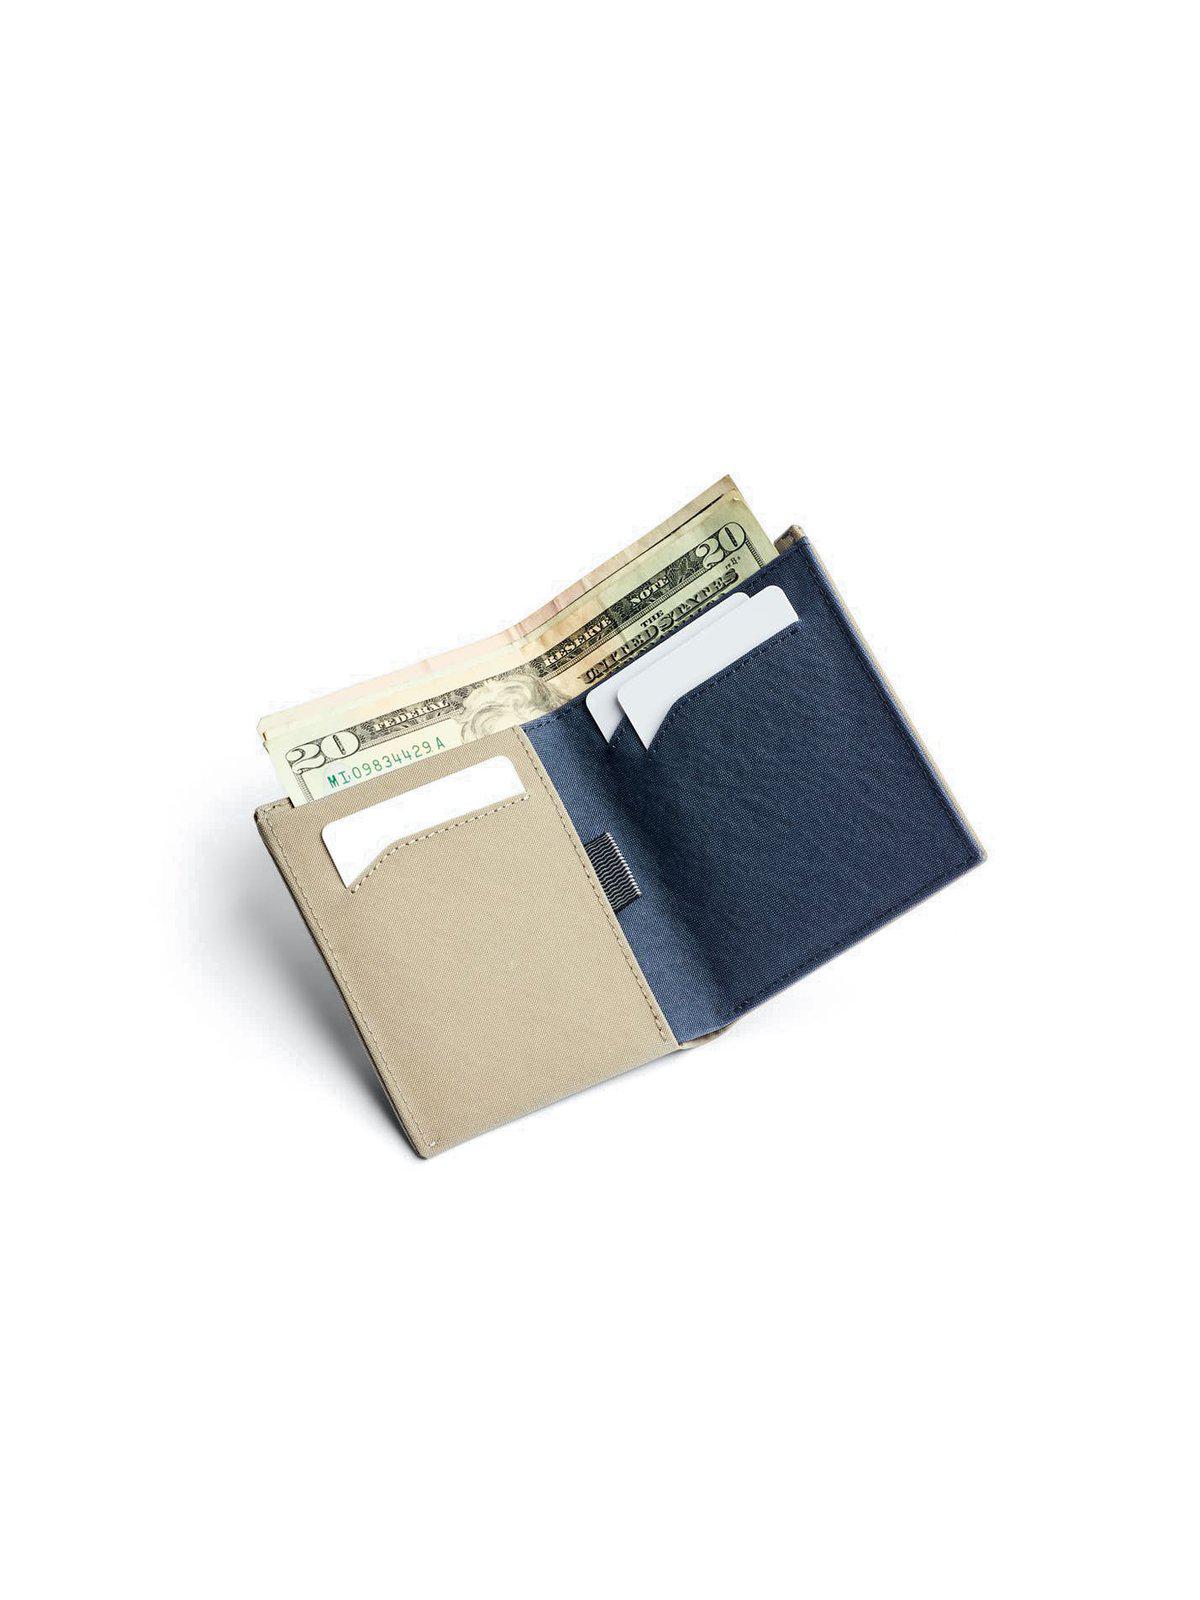 Bellroy Note Sleeve Wallet Woven Lichen RFID (Leather-Free)